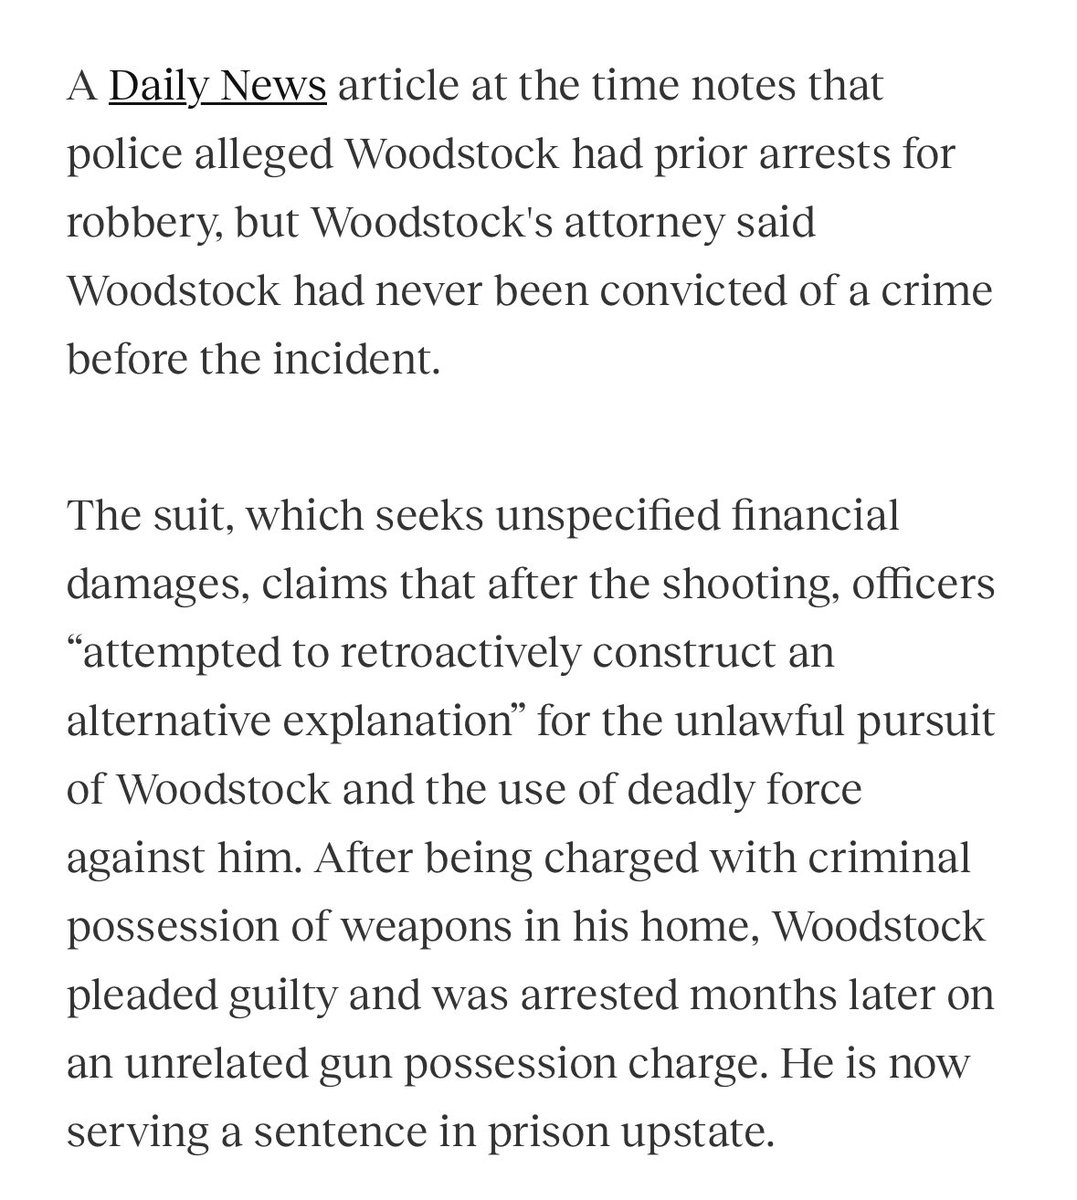 They shot an innocent man, pulled out every police lie they could, and then broke into his home before sending him to prison for something completely unrelated. Police are the greatest cartel in history.